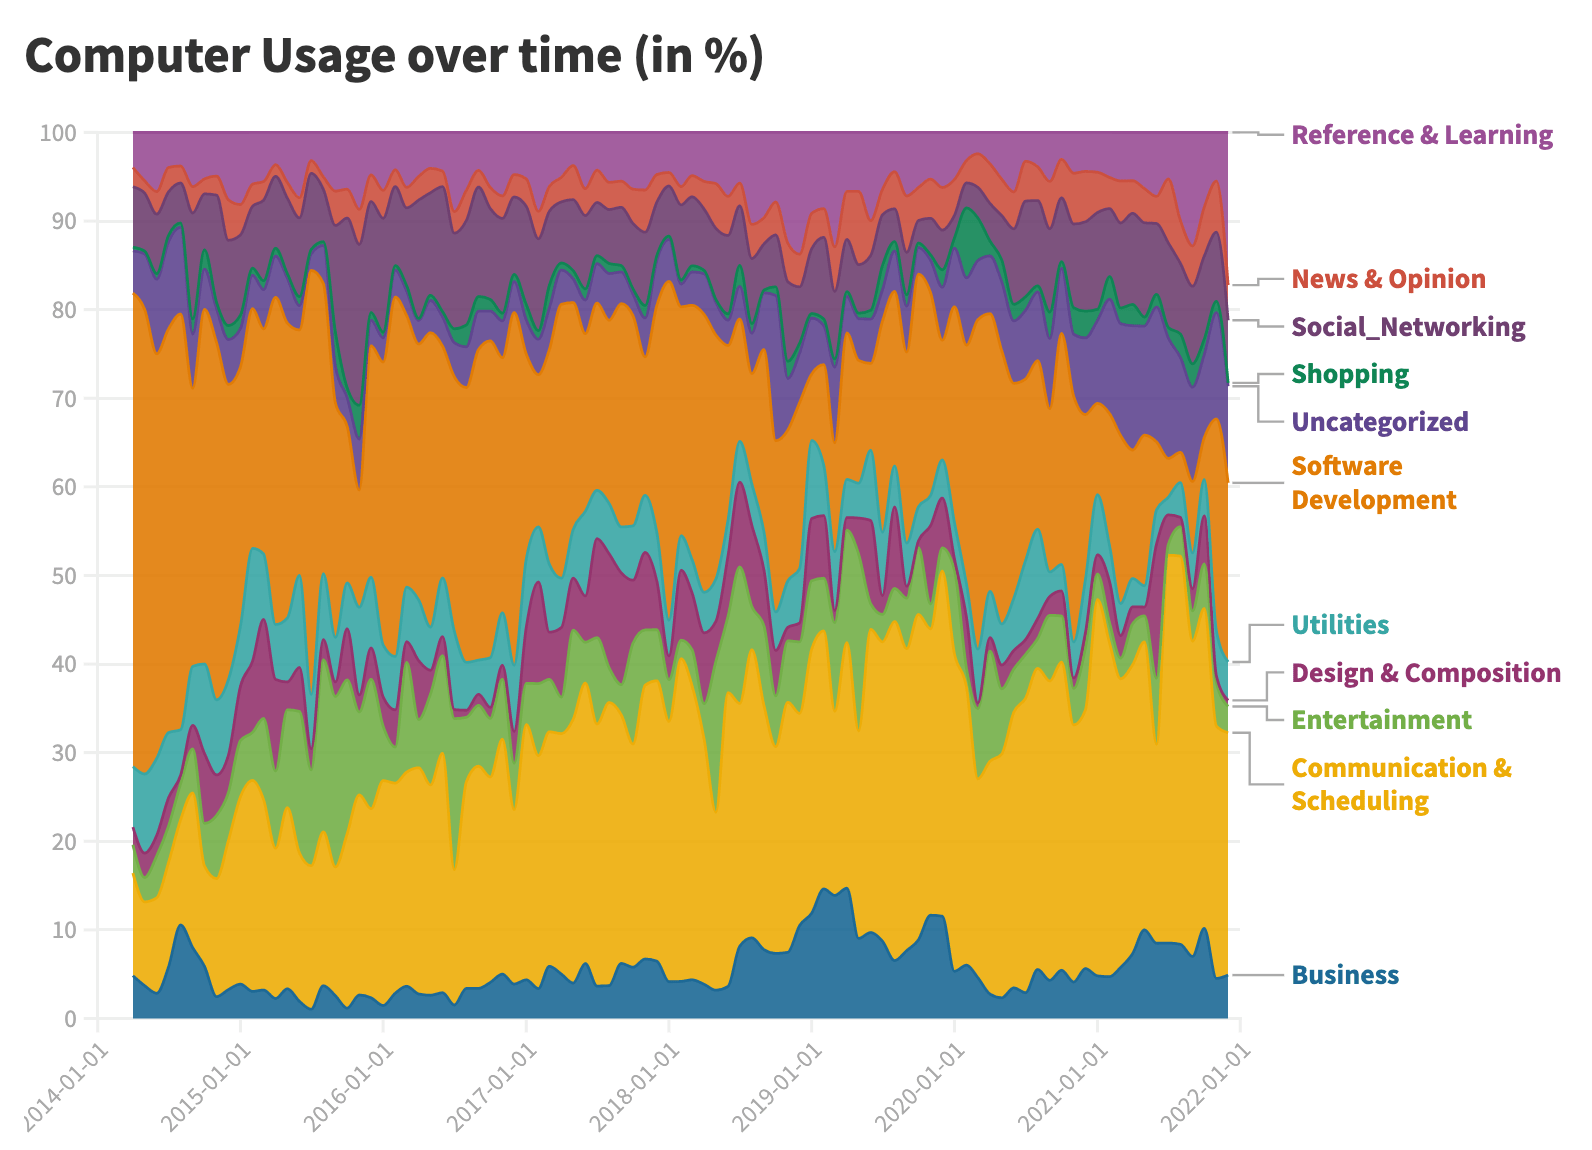 RescueTime Computer Usage Categories